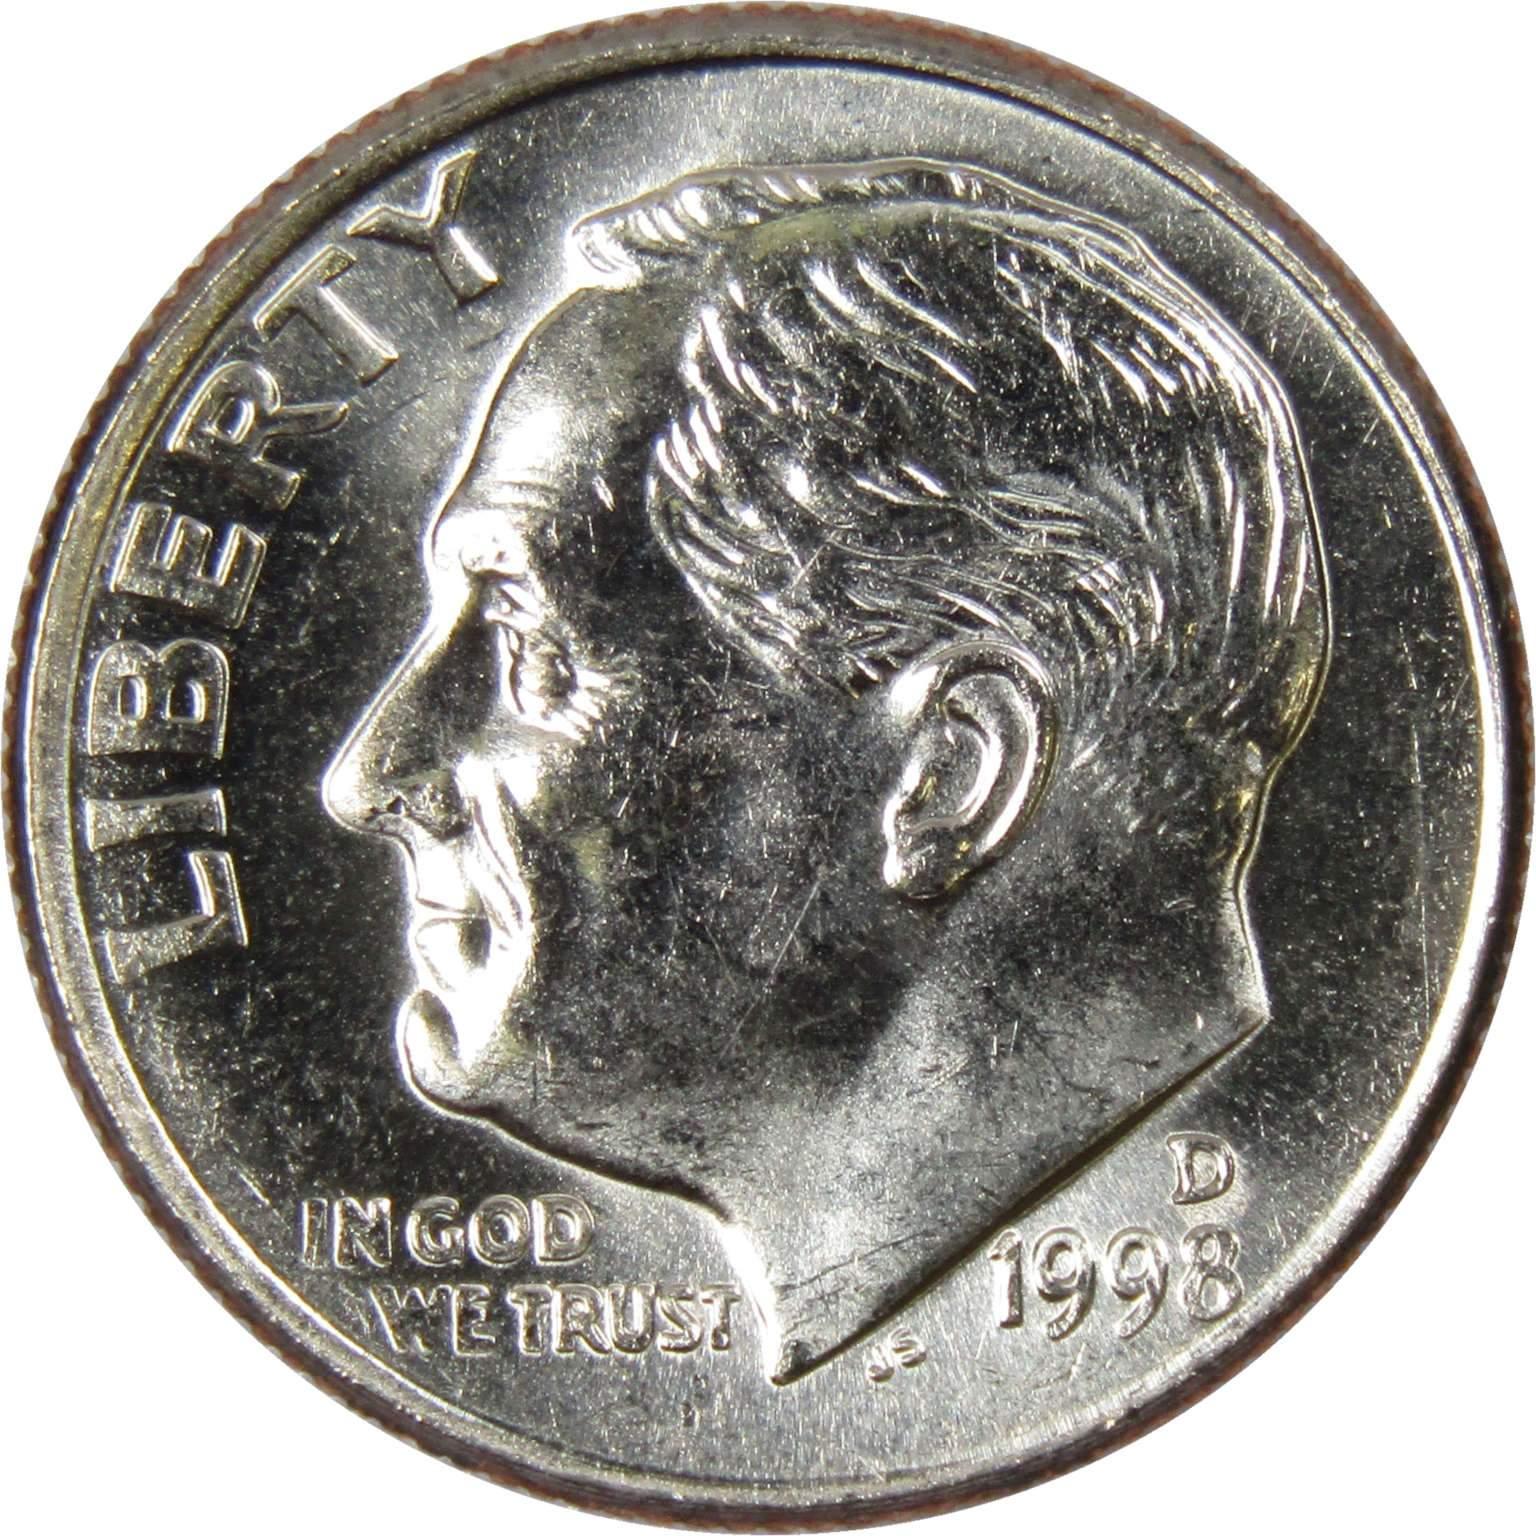 1998 D Roosevelt Dime BU Uncirculated Mint State 10c US Coin Collectible